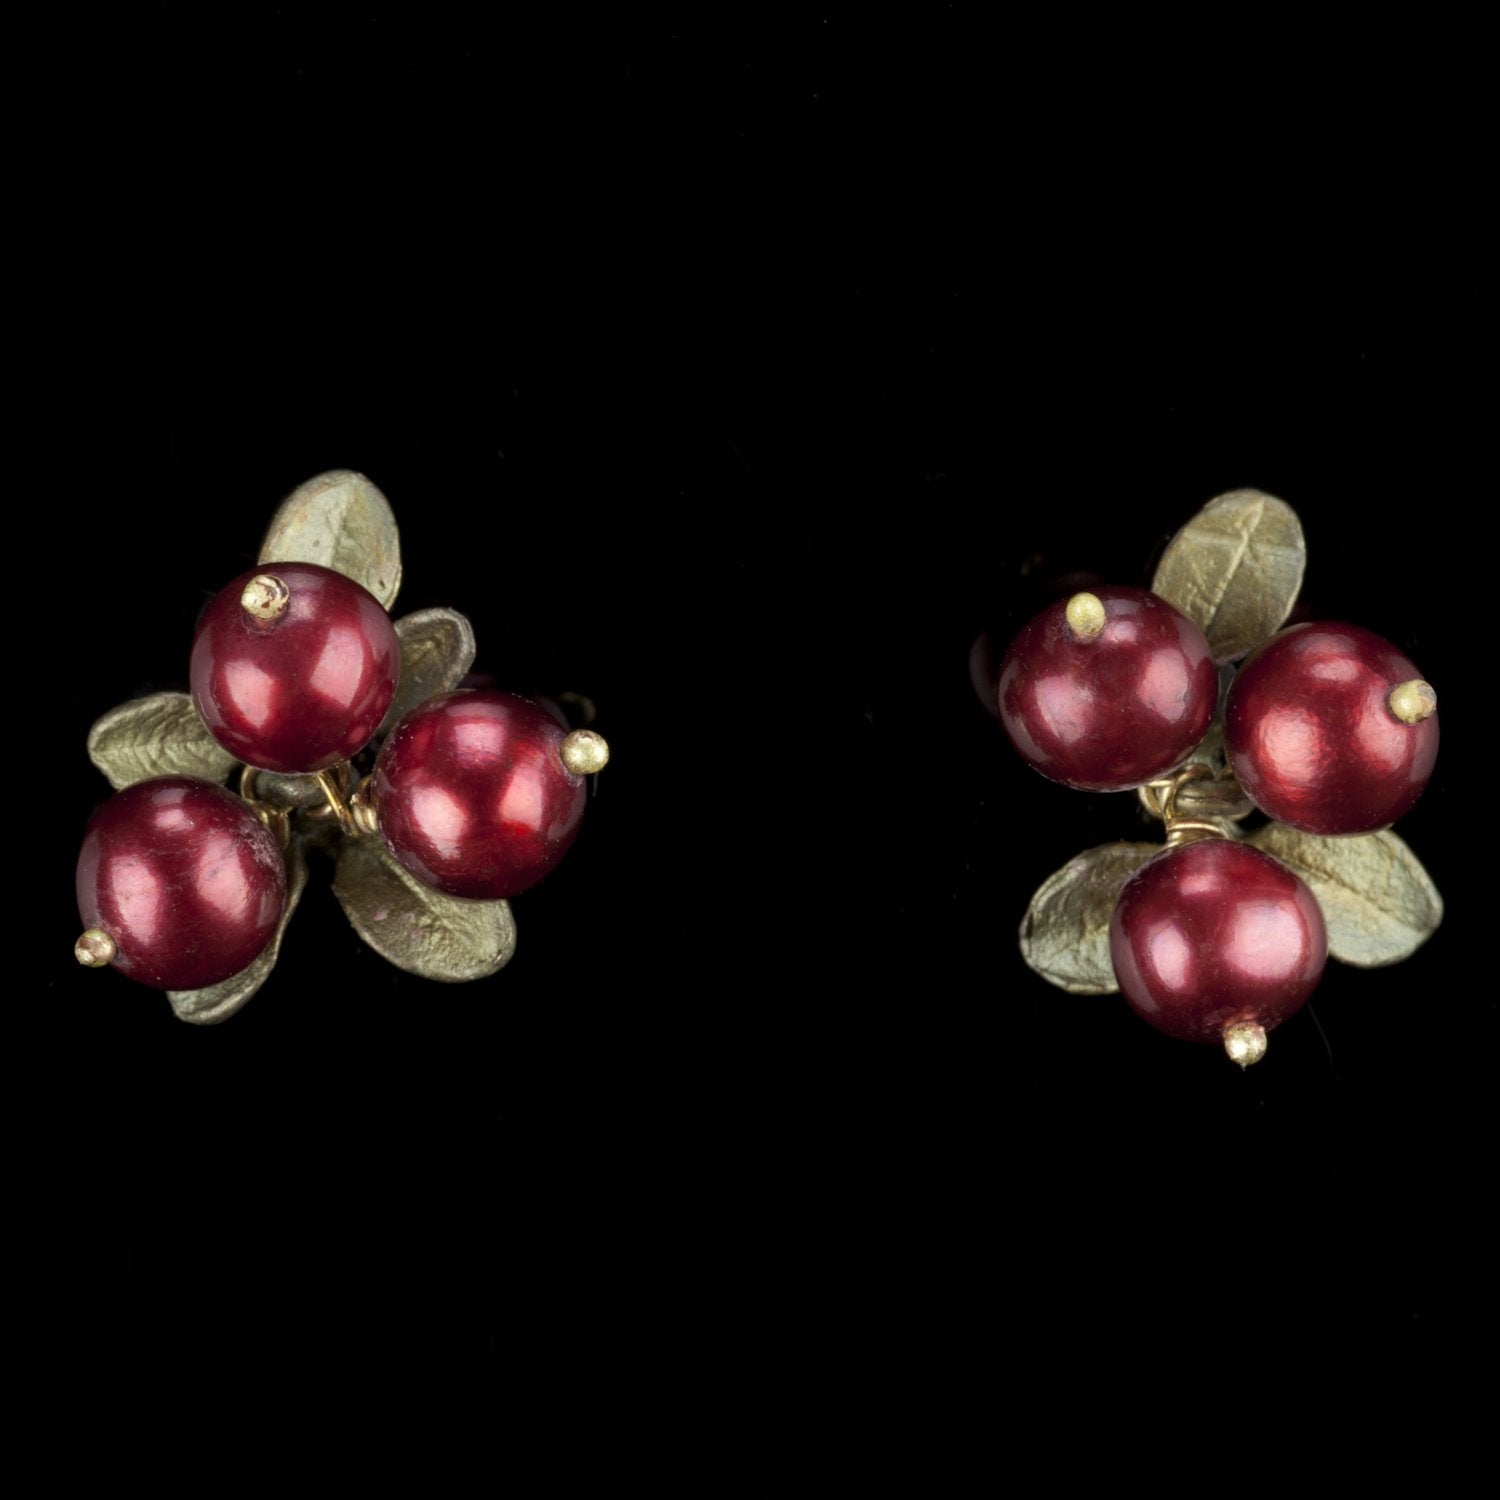 Cranberry Earrings - 3 Berry Post